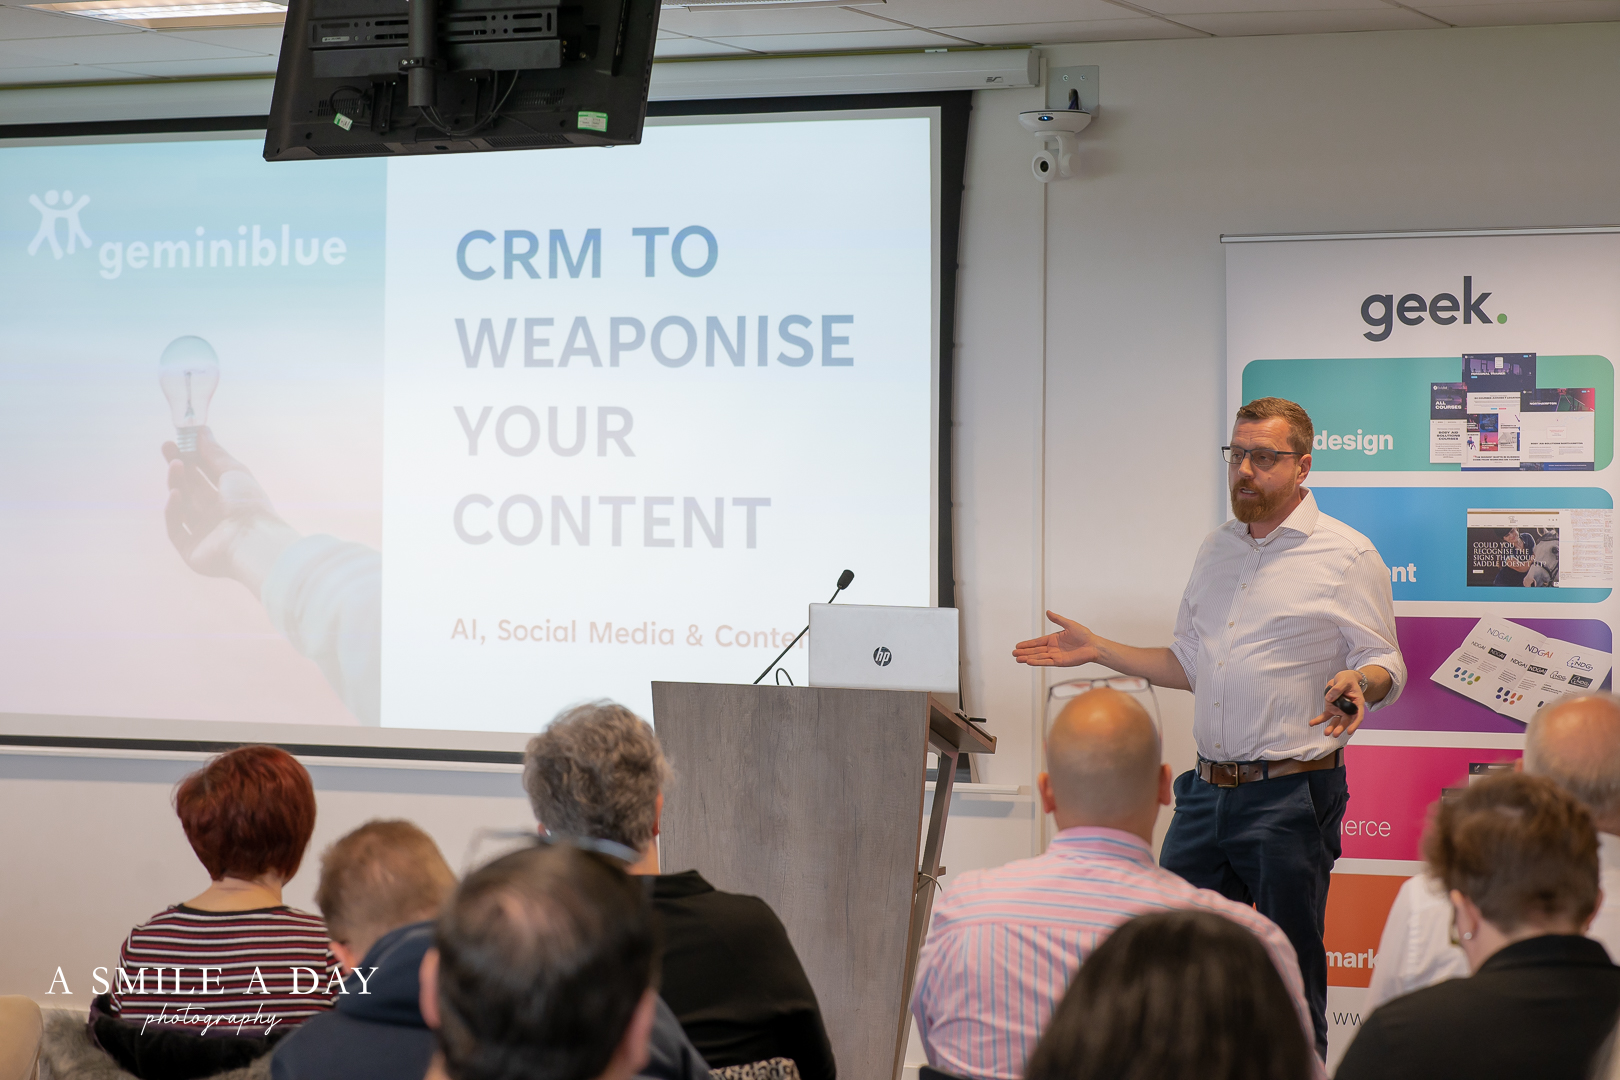 Using A CRM to Weaponise Your Content – Workshop Recap